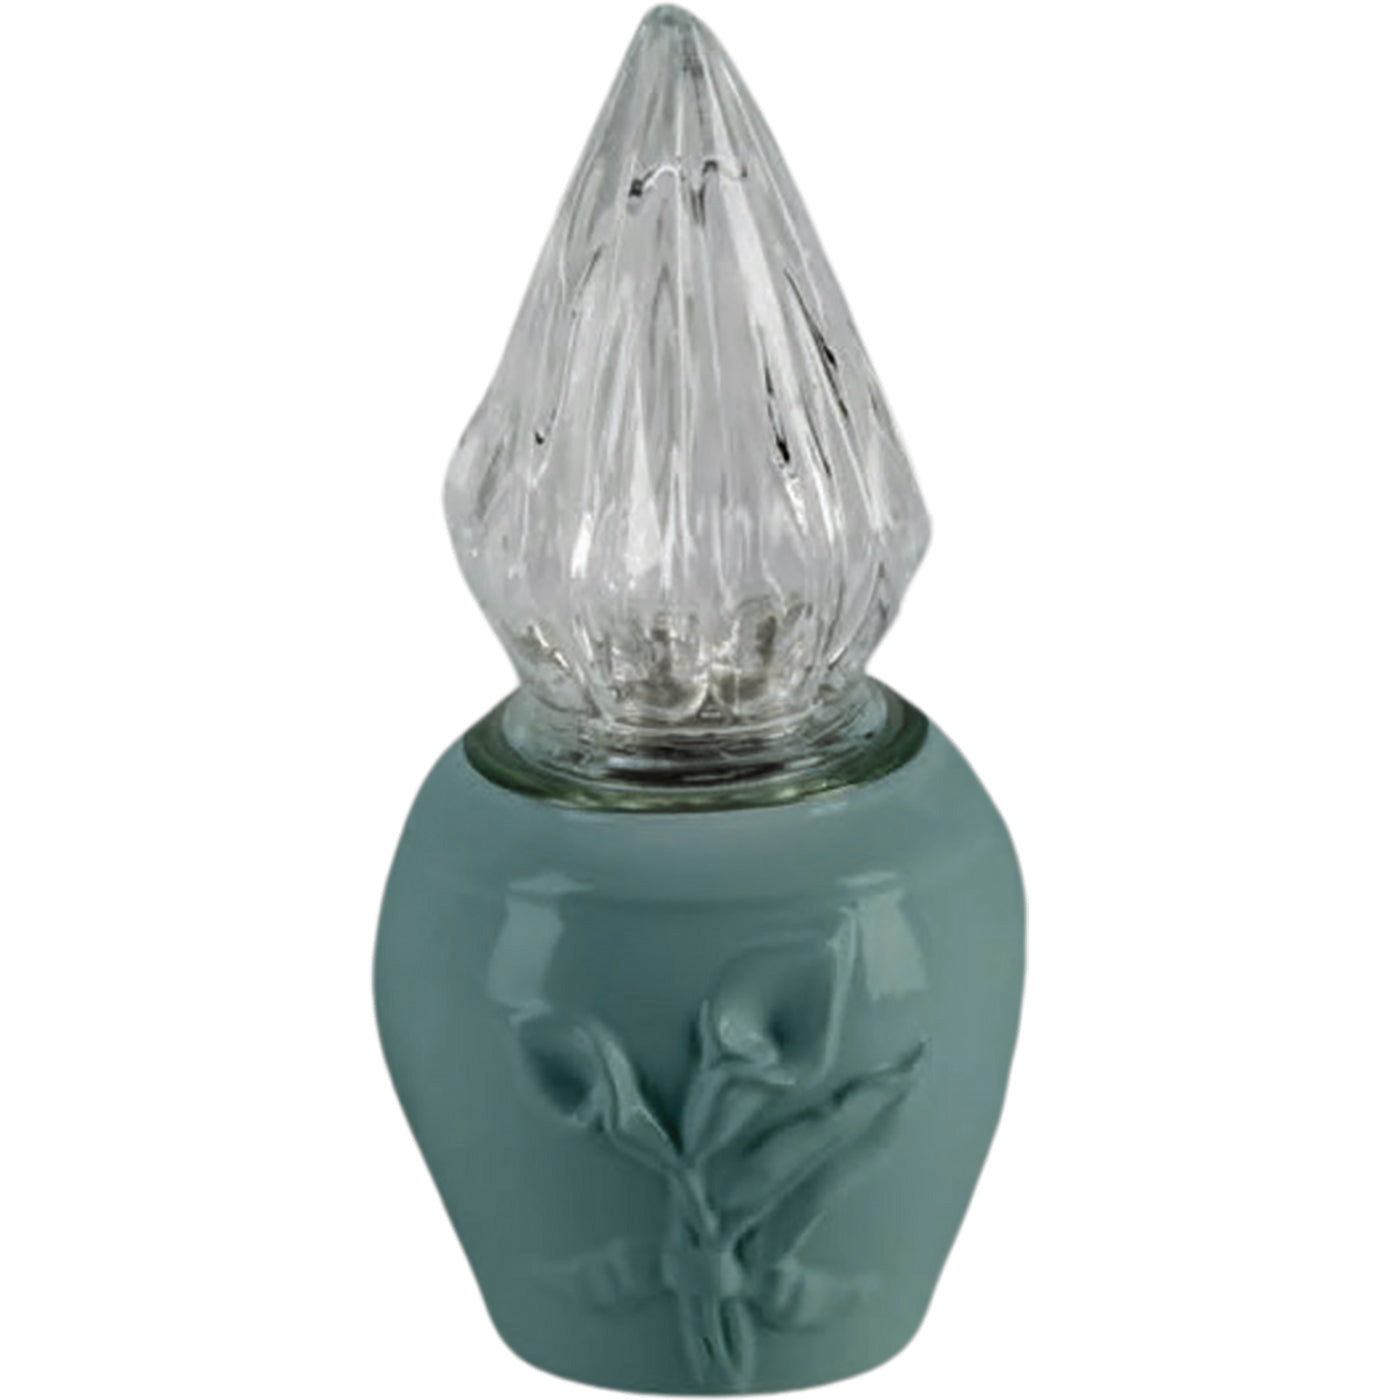 Grave light Calla green 10x10cm - 3.9x3.9in In green porcelain, ground attached CAL164T/V